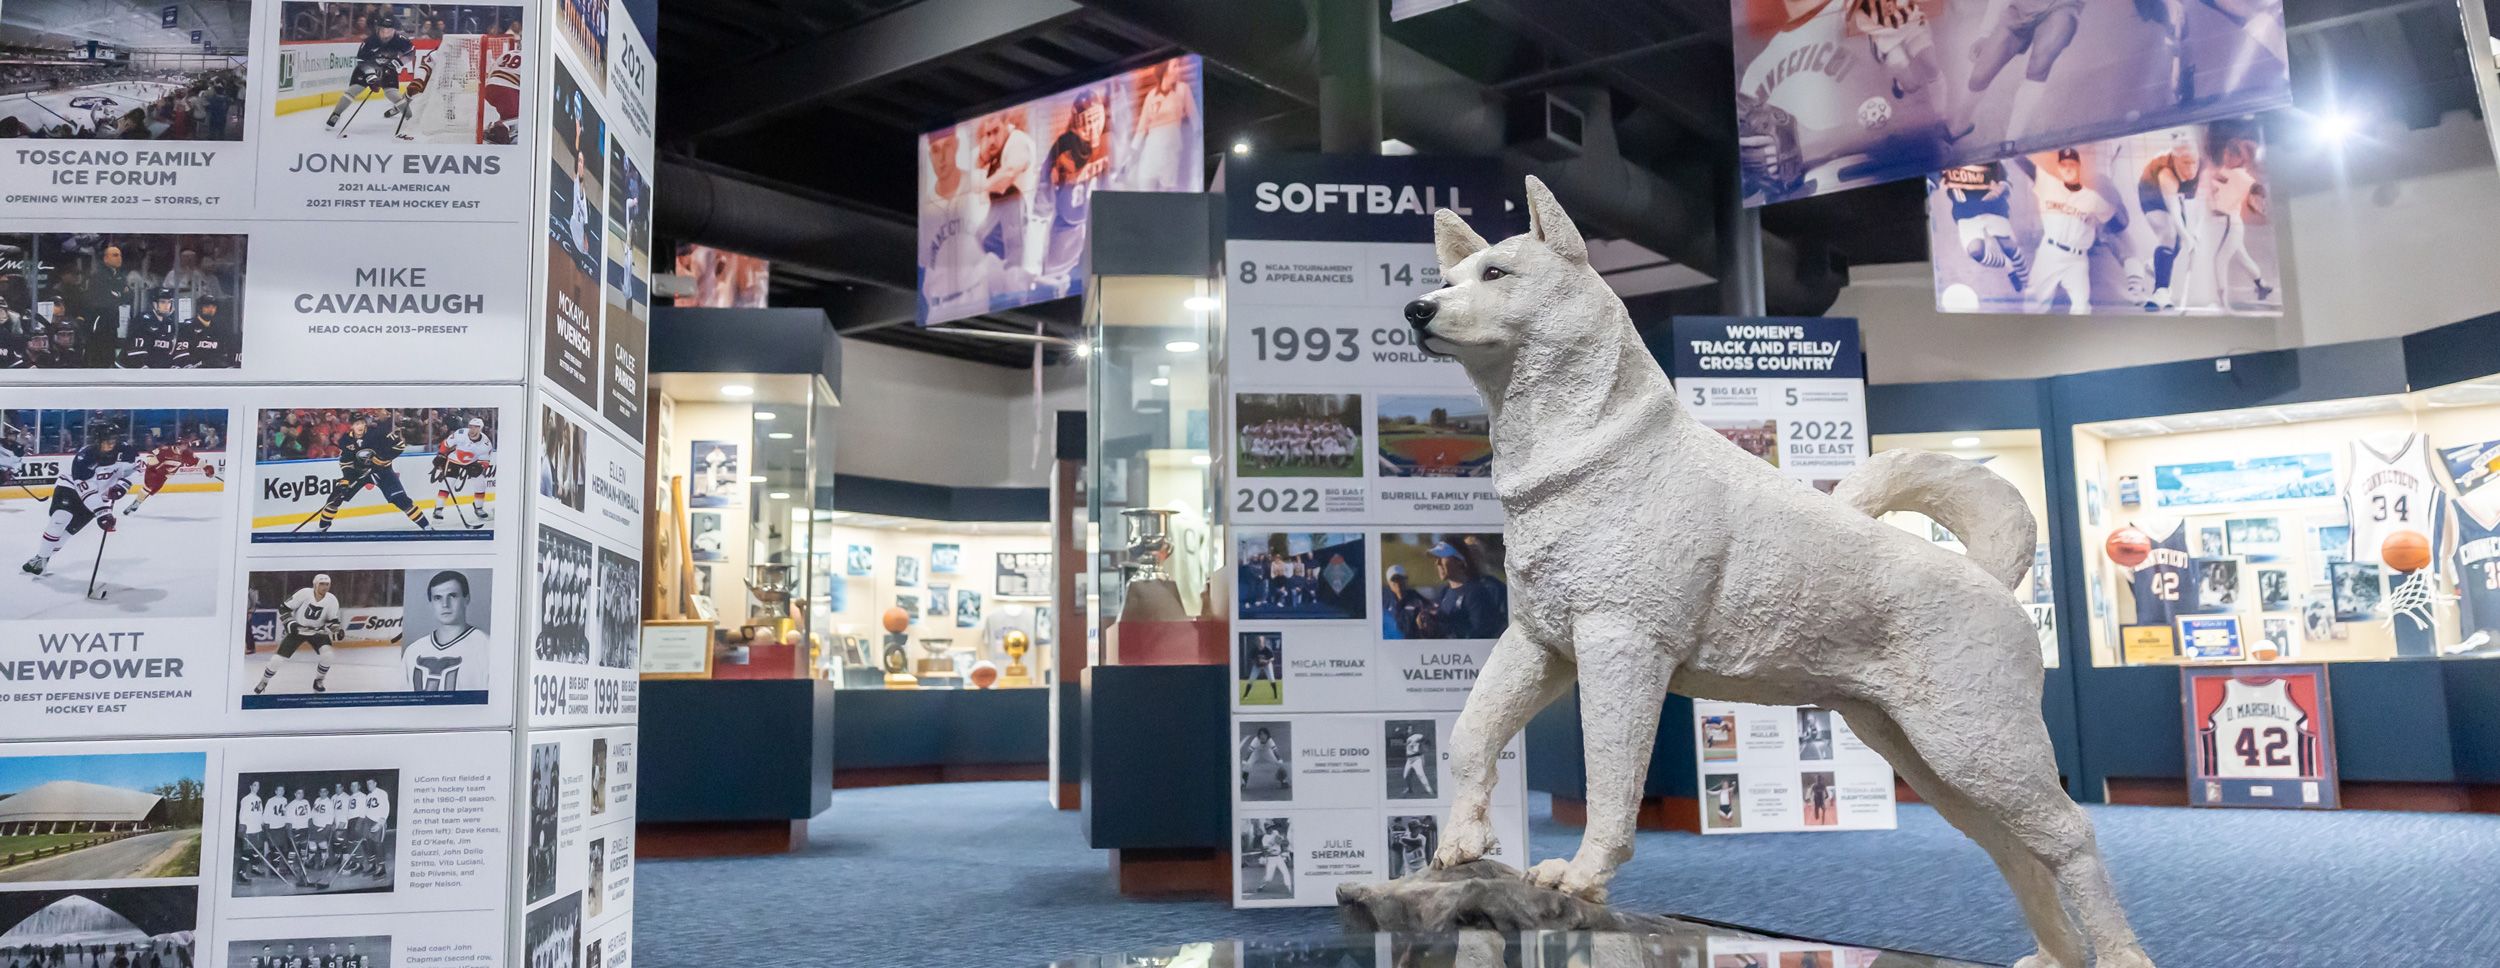 J. Robert Donnelly Husky Heritage Sports Museum at the Alumni Center 